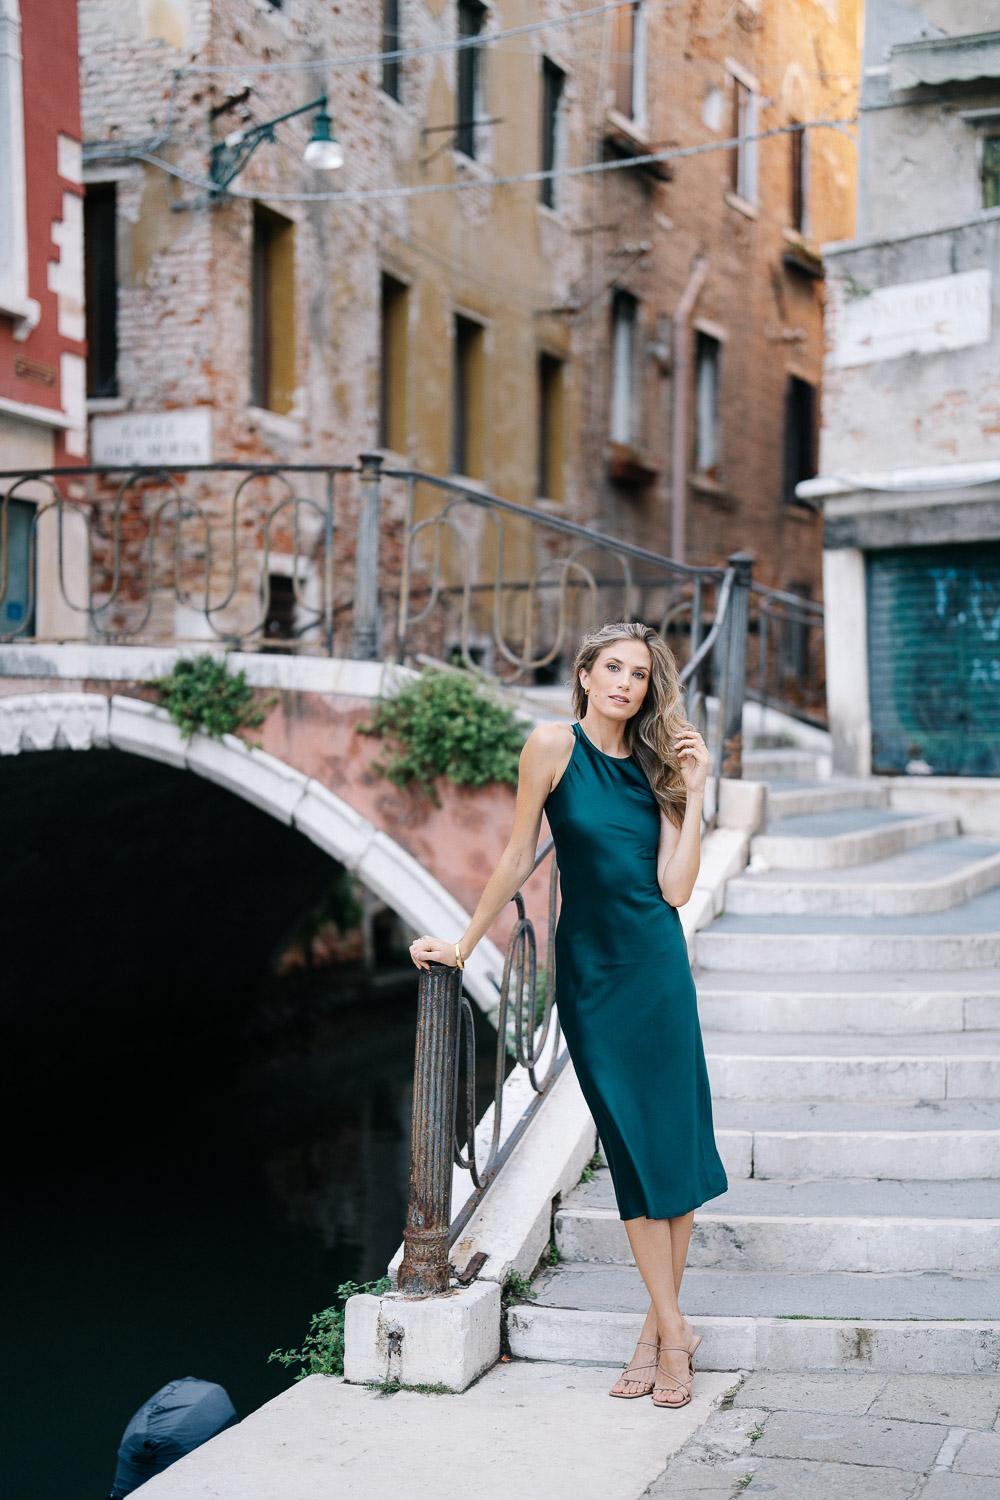 portrait photoshoot in Venice by photographer